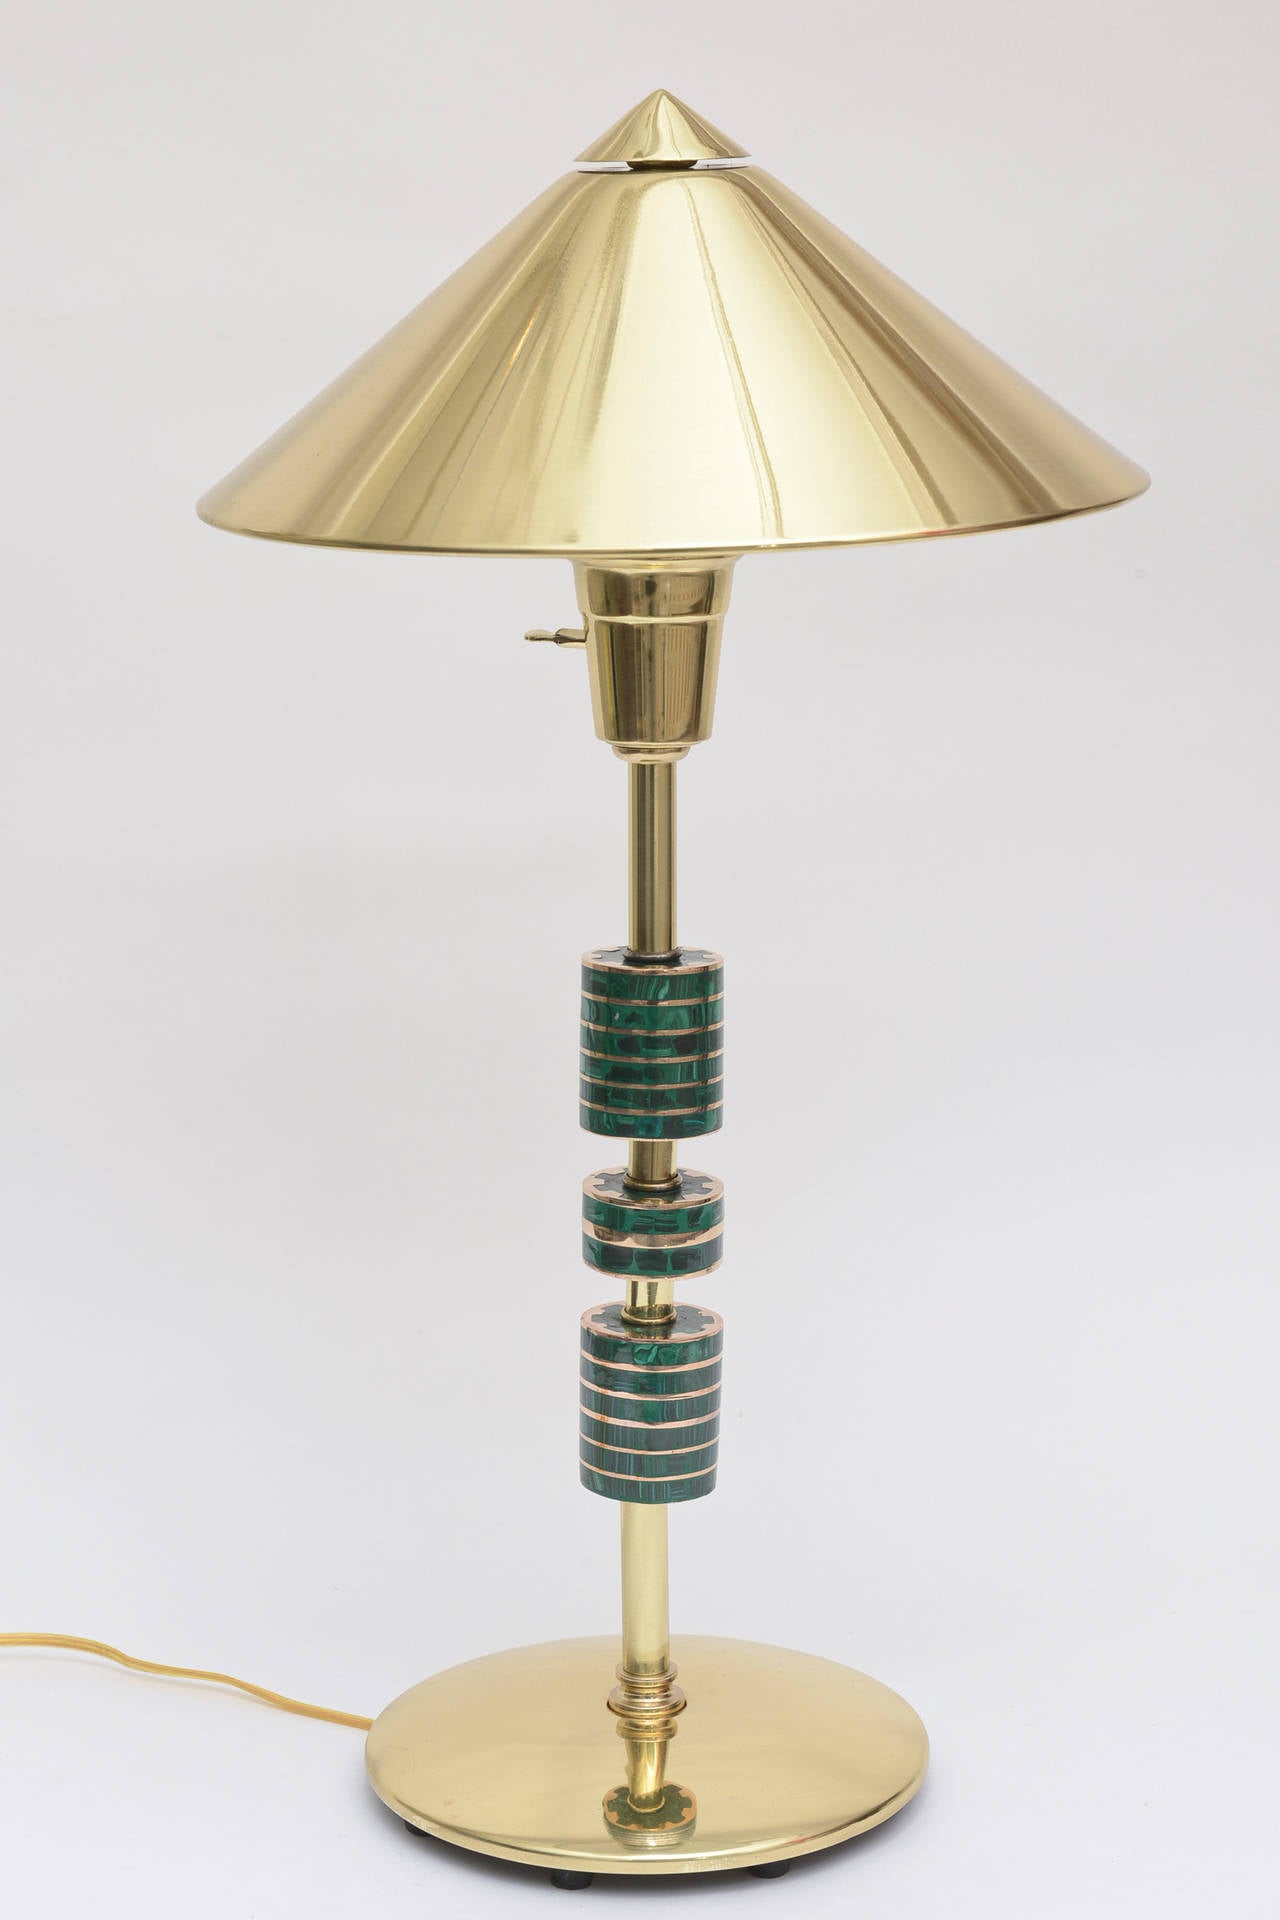 This amazing Mid-Century Modern lamp is in the style and attribution of the Mexican artist, Pepe Mendoza. It is lovely with its original brass shade with a white enameled metal coating underneath. The pagoda style brass shade is all original. It has